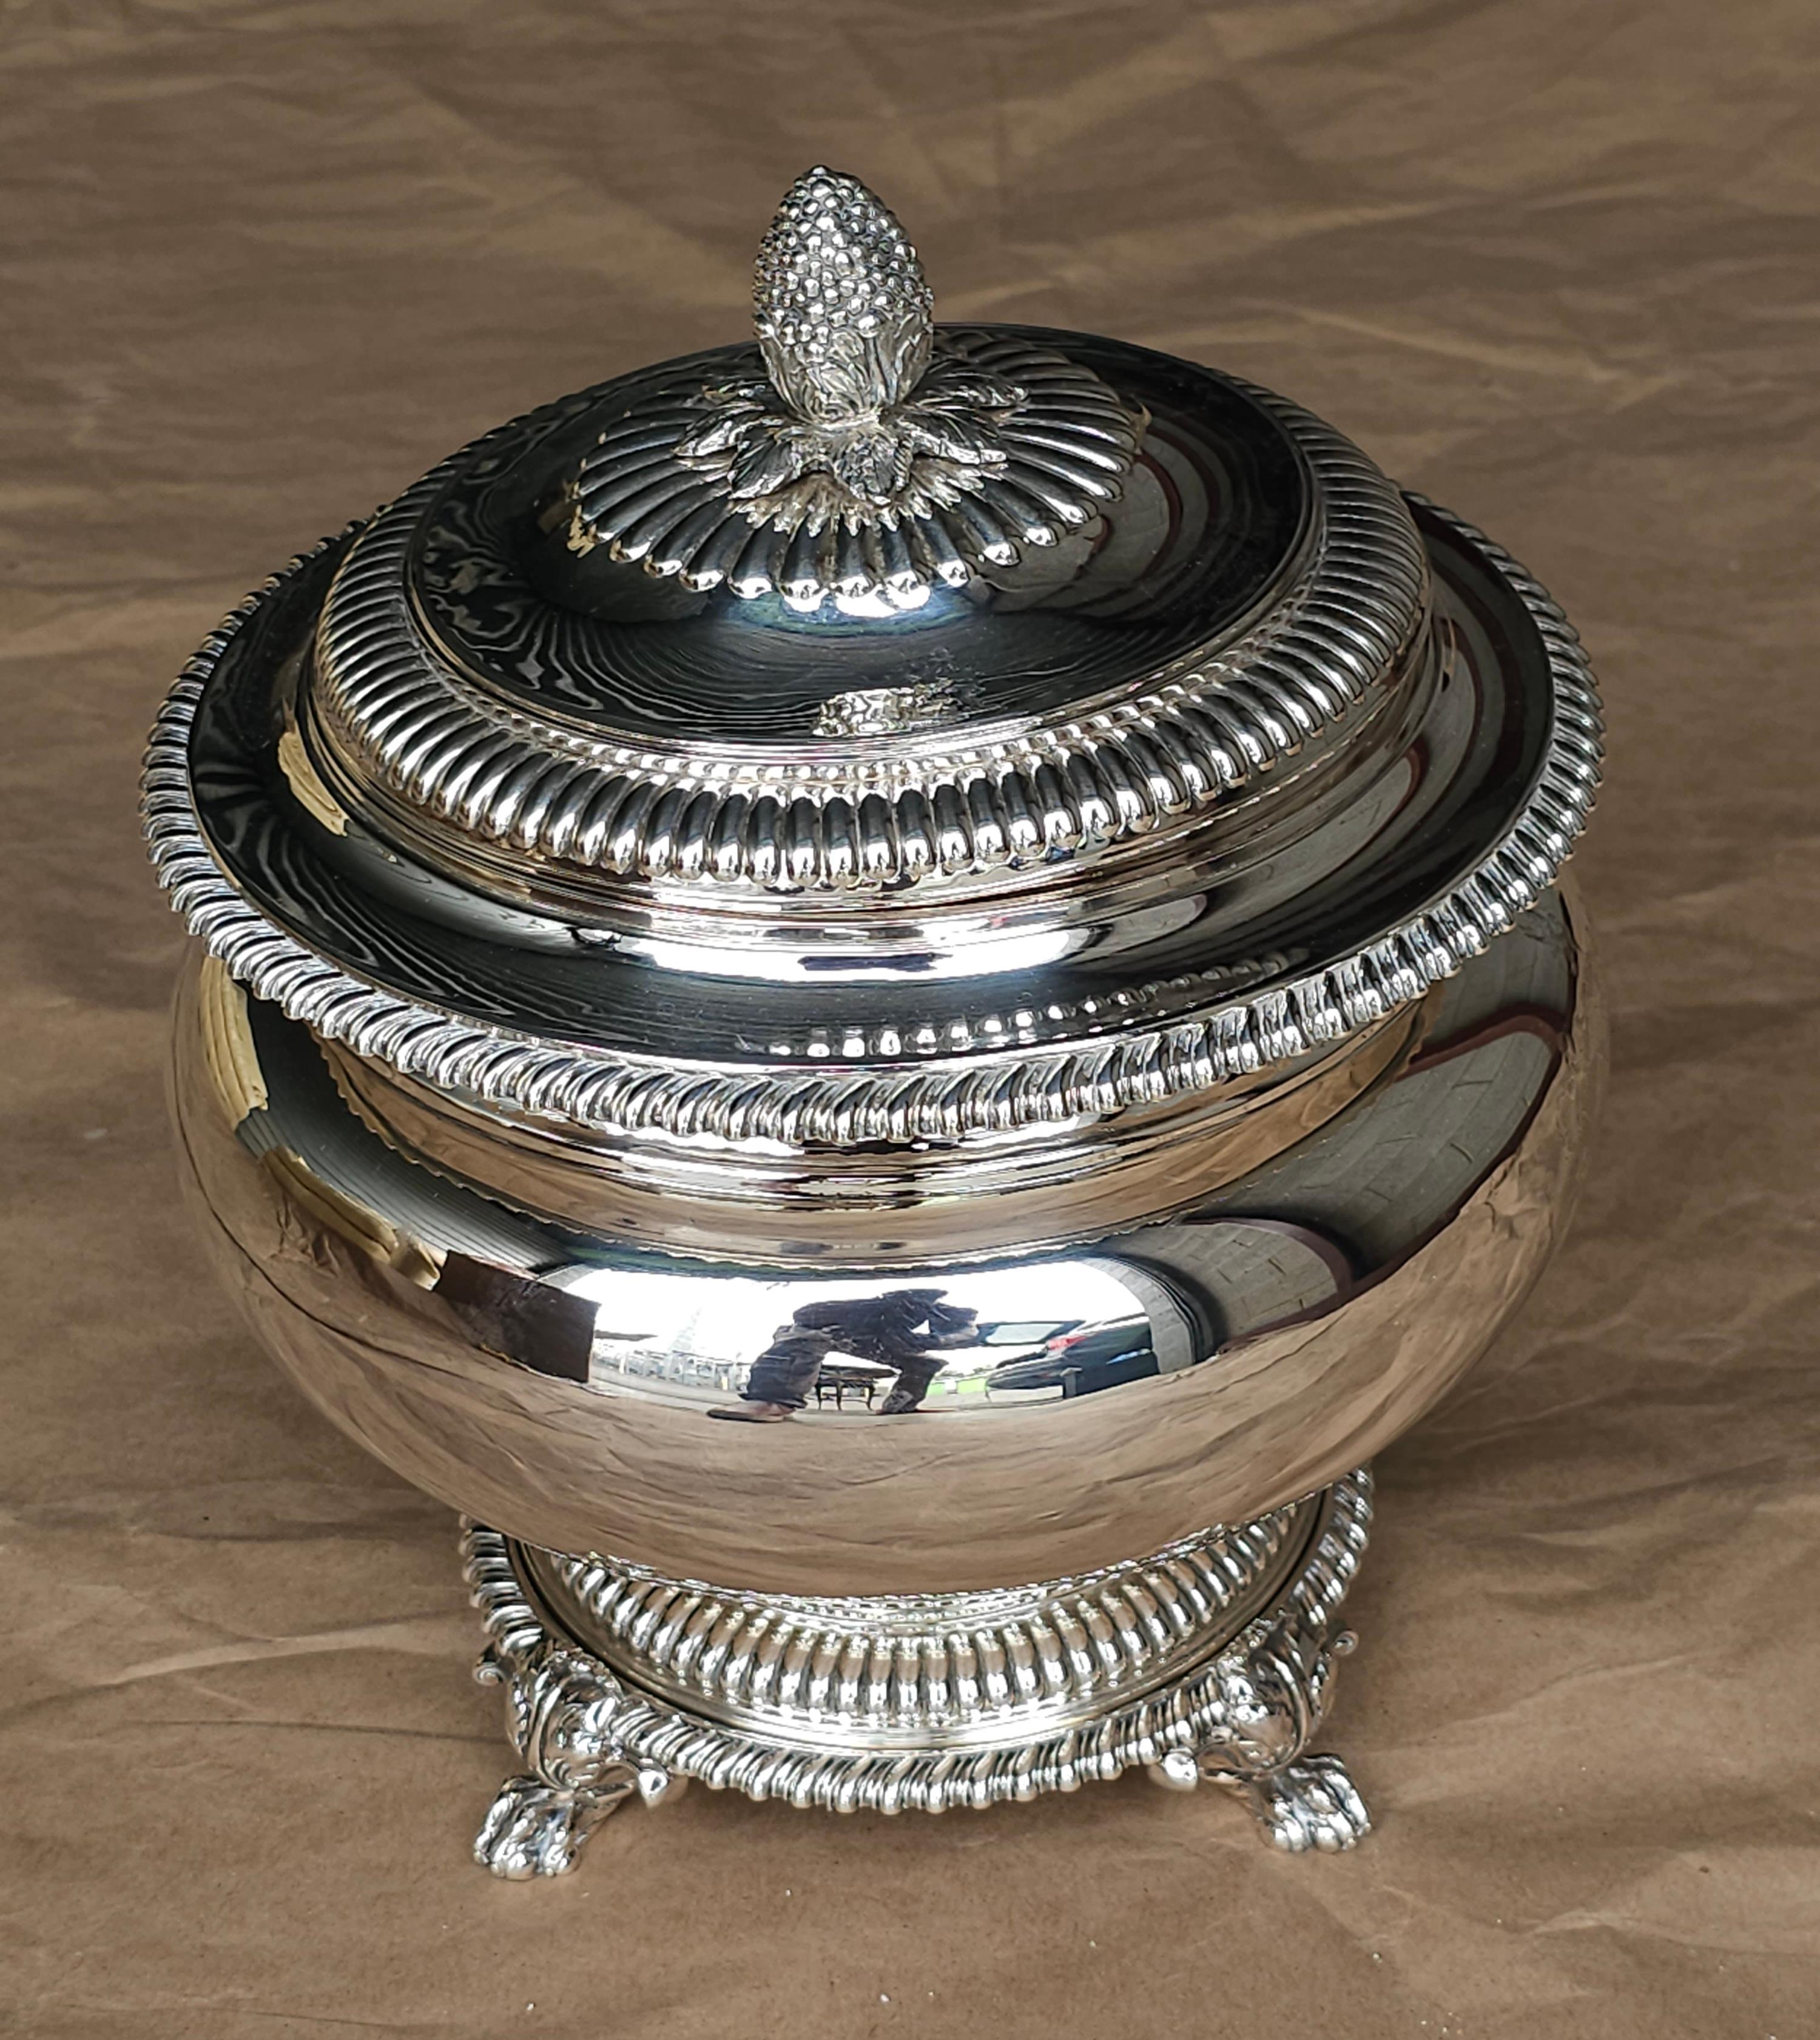 A museum quality George IV English Sterling Silver Covered Soup Tureen on Stand by
Paul Storr, London, Circa 1823
Lid engraved with 'Lion Rampant' herald; also repeated to the shoulder of the body with motto Nil Desperandum (Never Despair). Interior